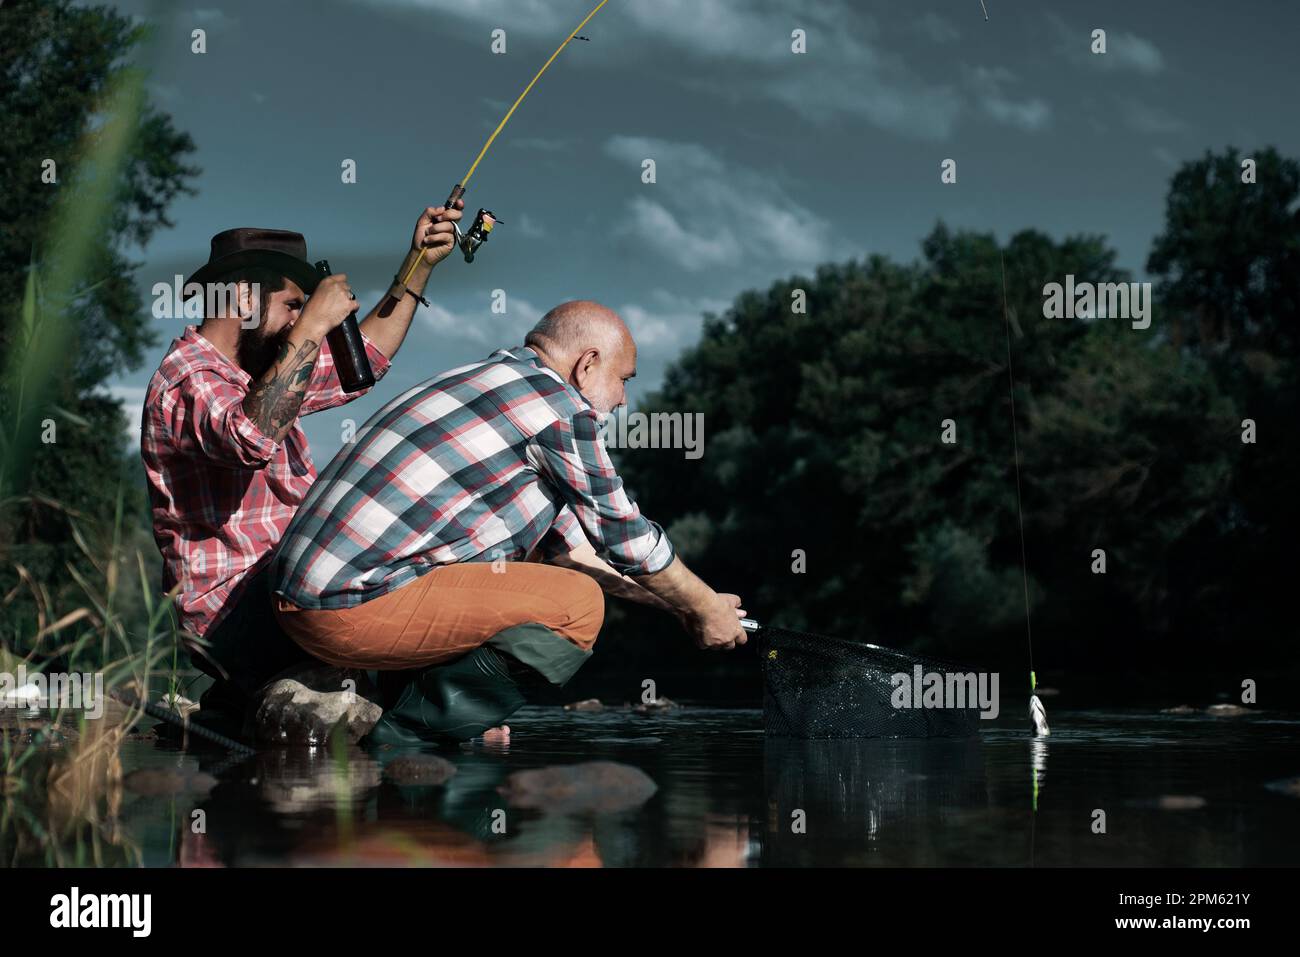 https://c8.alamy.com/comp/2PM621Y/nice-day-for-fishing-bearded-men-catching-fish-off-limits-fishing-fishermen-fishing-equipment-fisher-fishing-equipment-catch-me-if-you-can-2PM621Y.jpg